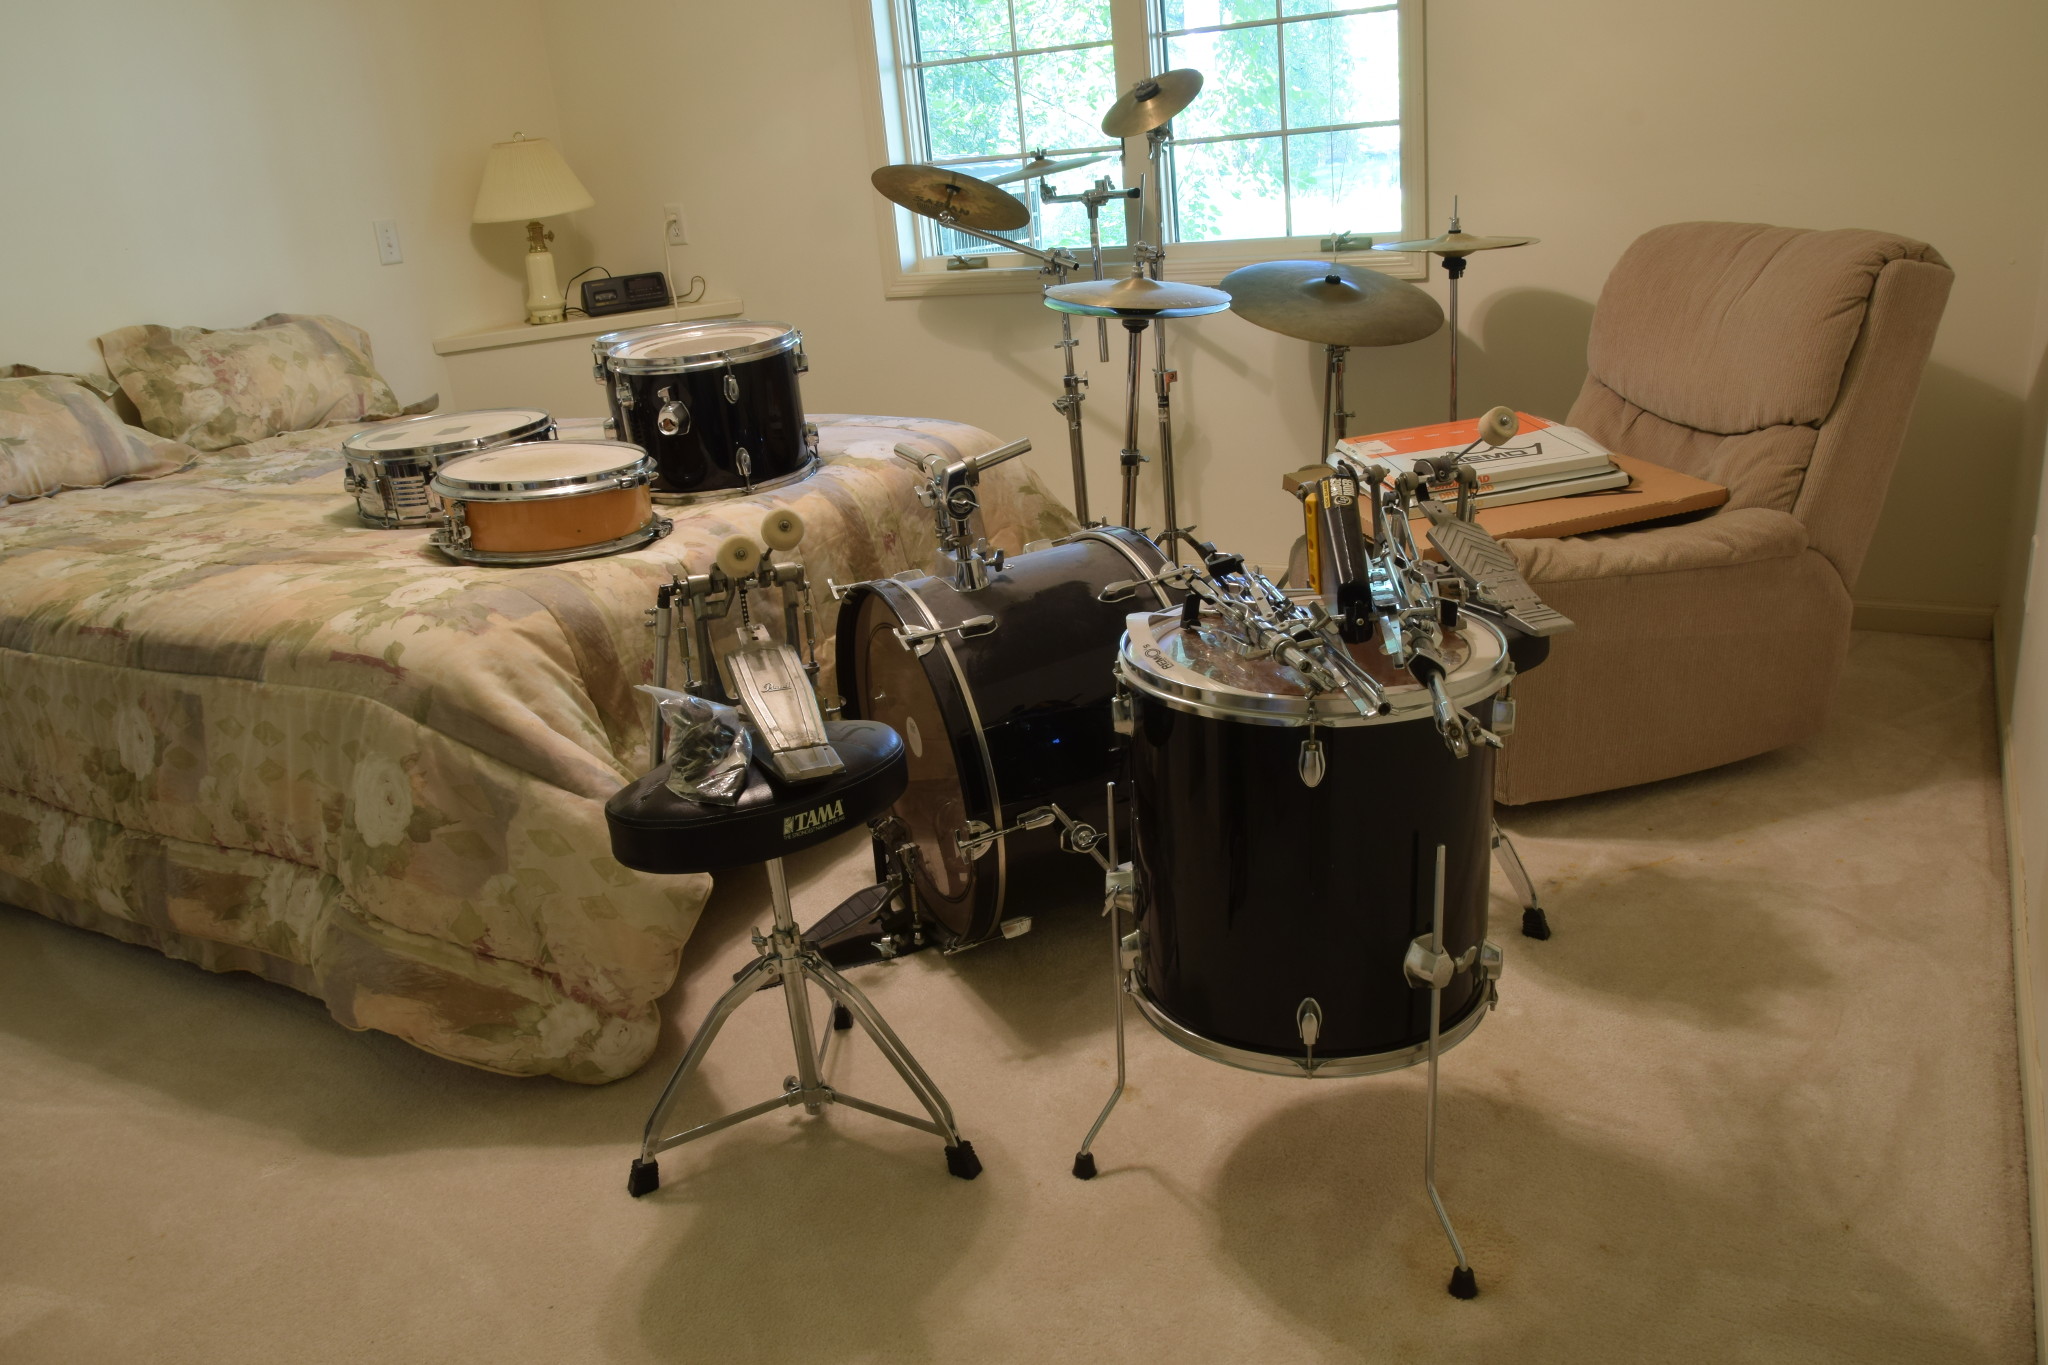 Used Drum Set for Sale in the Twin Cities - LinuxPhoto